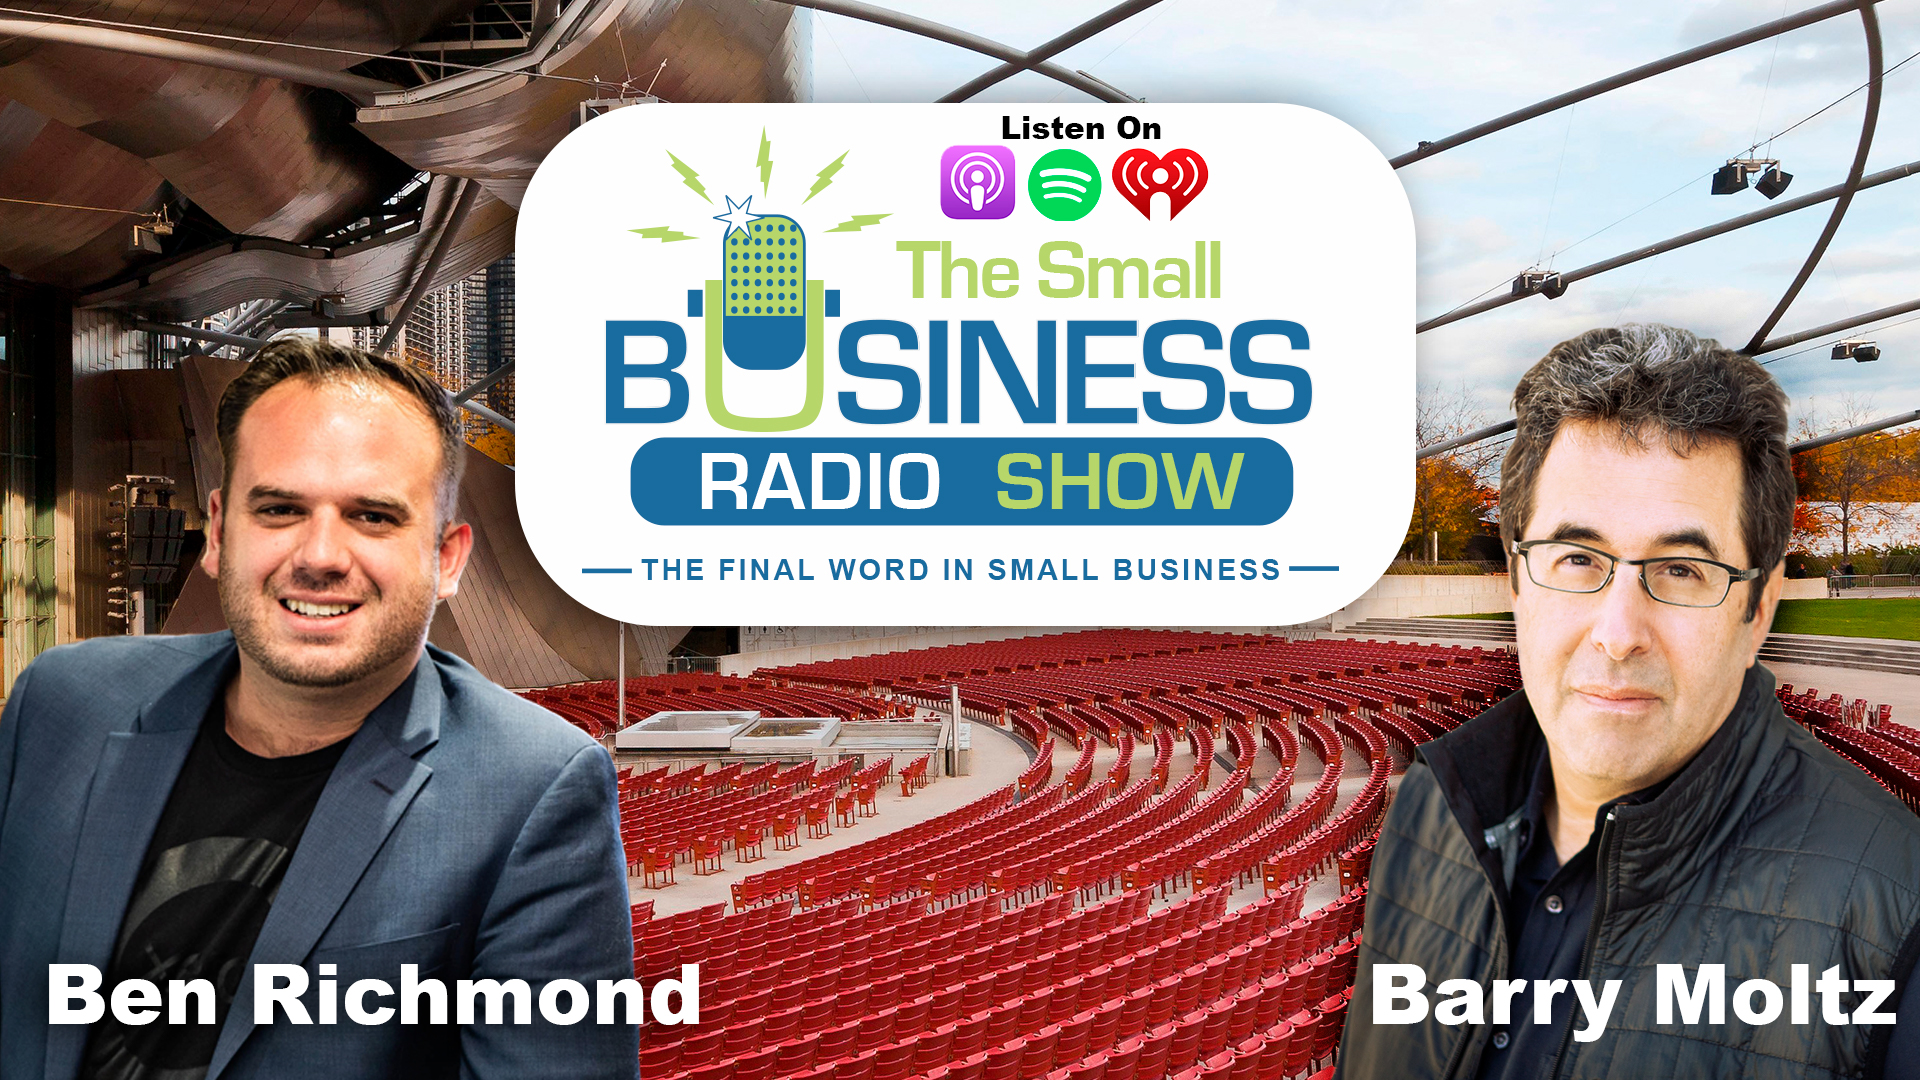 Ben Richmond on The Small Business Radio Show